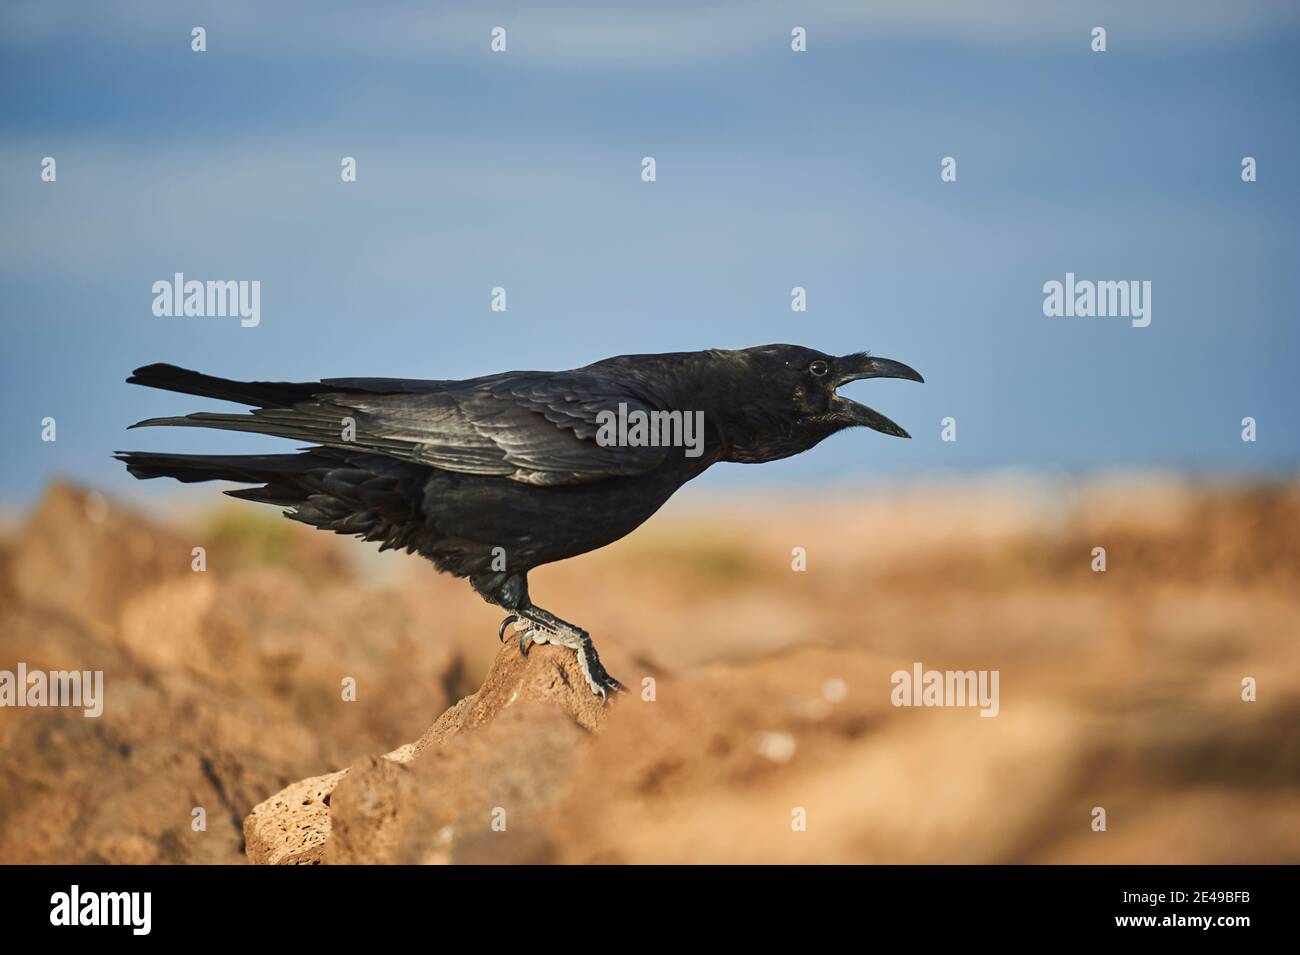 Subspecies of the common raven found on the Canary Islands (Corvus corax tingitanus), adult bird stands on a rock and crows, Fuerteventura, Canary Islands, Spain, Europe Stock Photo